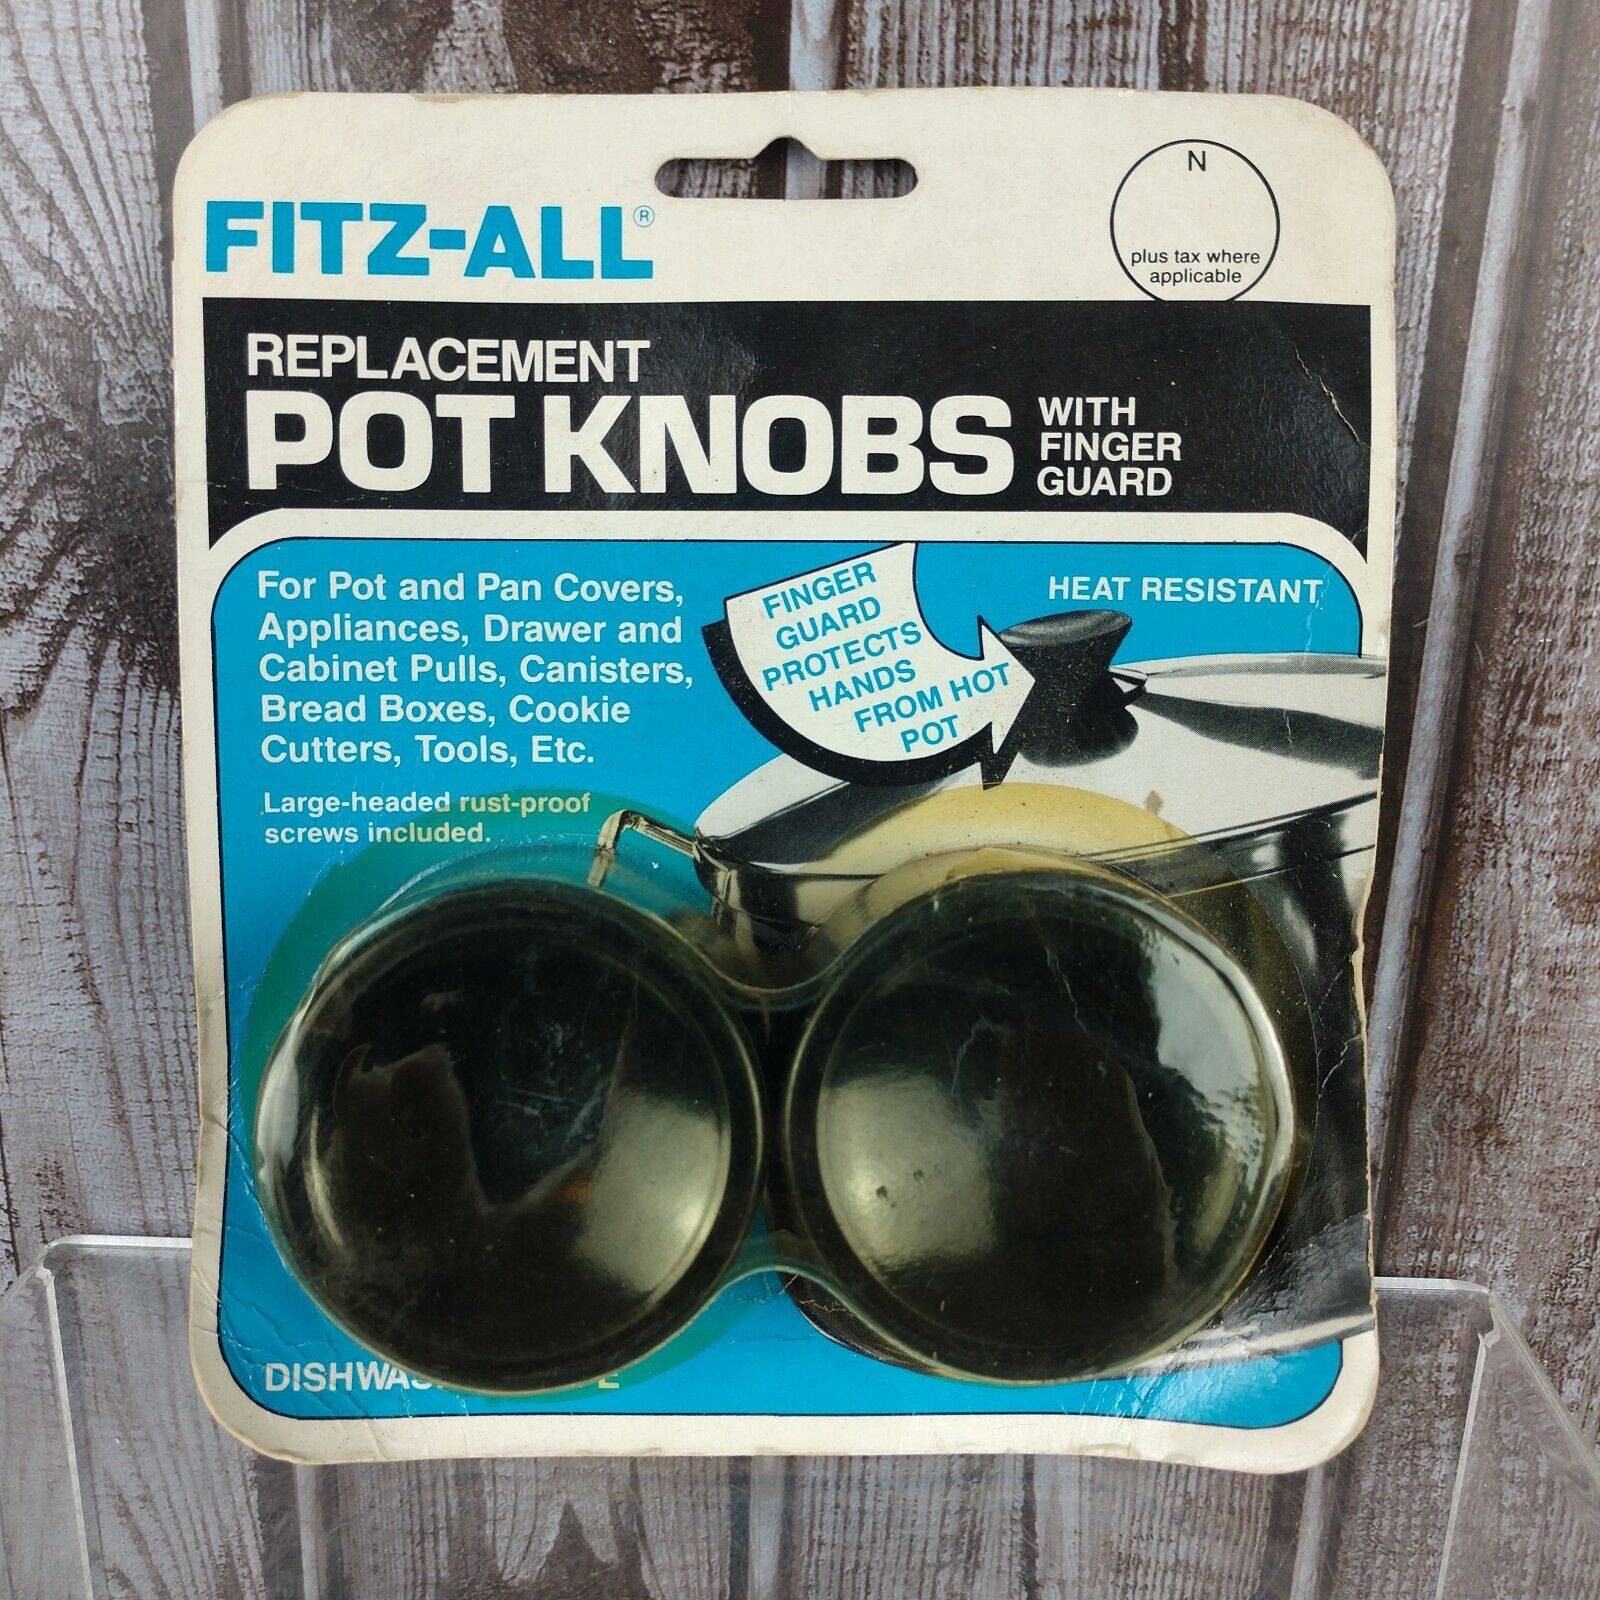 Fitz-All Replacement Pot Knobs, Model #581 Set of 2 knobs by TOPS Mfg. Co.